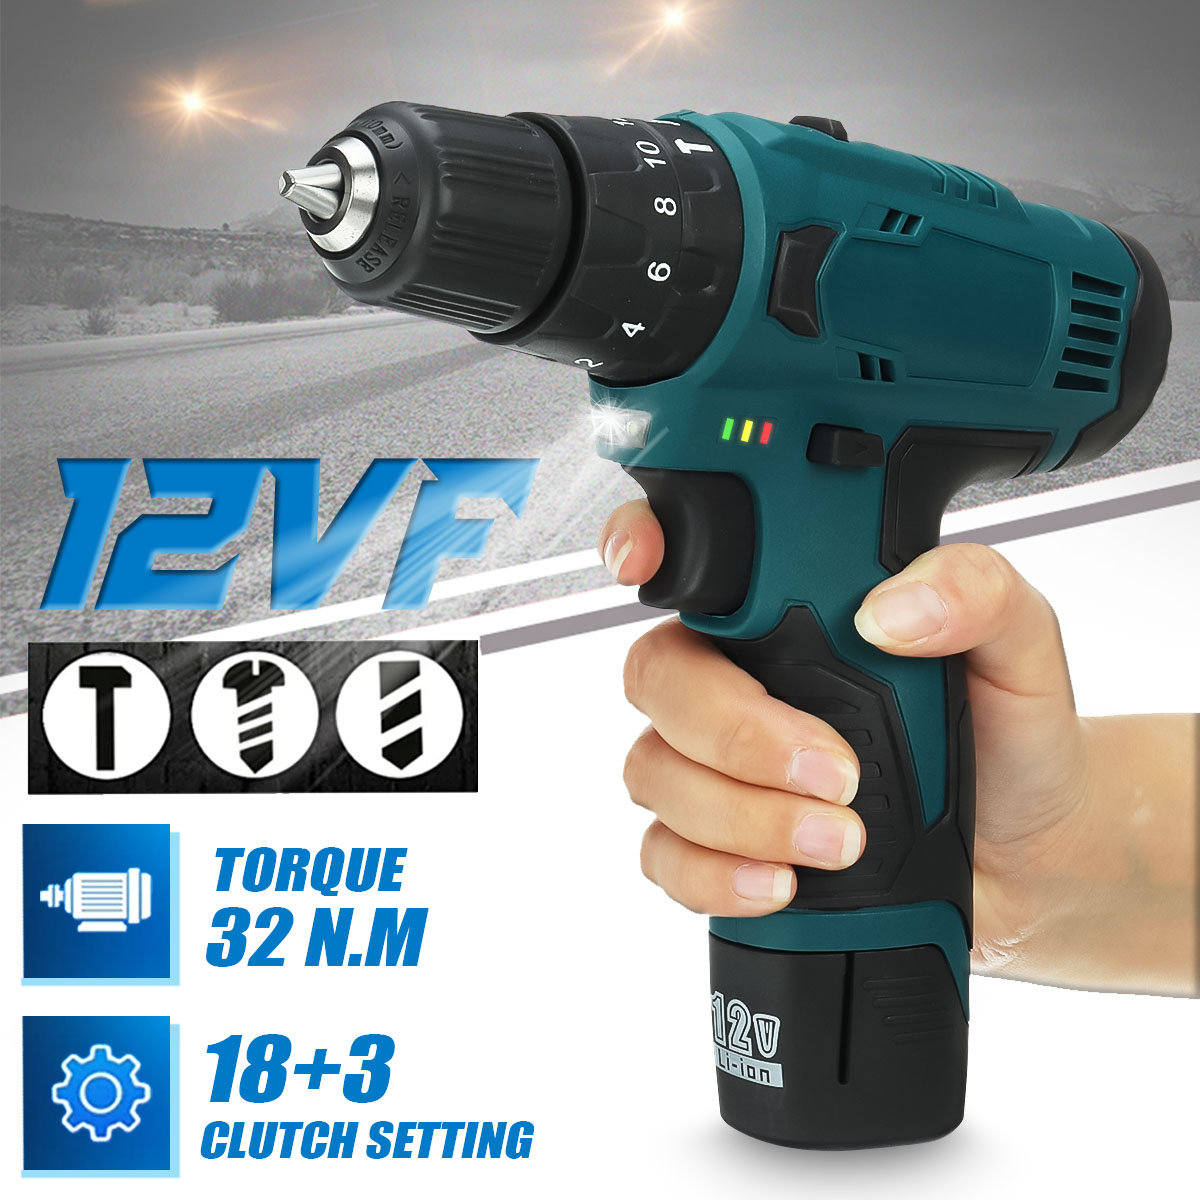 12V-1500mAh-3-IN-1-2-Speed-Cordless-Drill-Driver-Electric-Screwdriver-Hammer-Flat-Drill-183-Torque-1-1868432-2